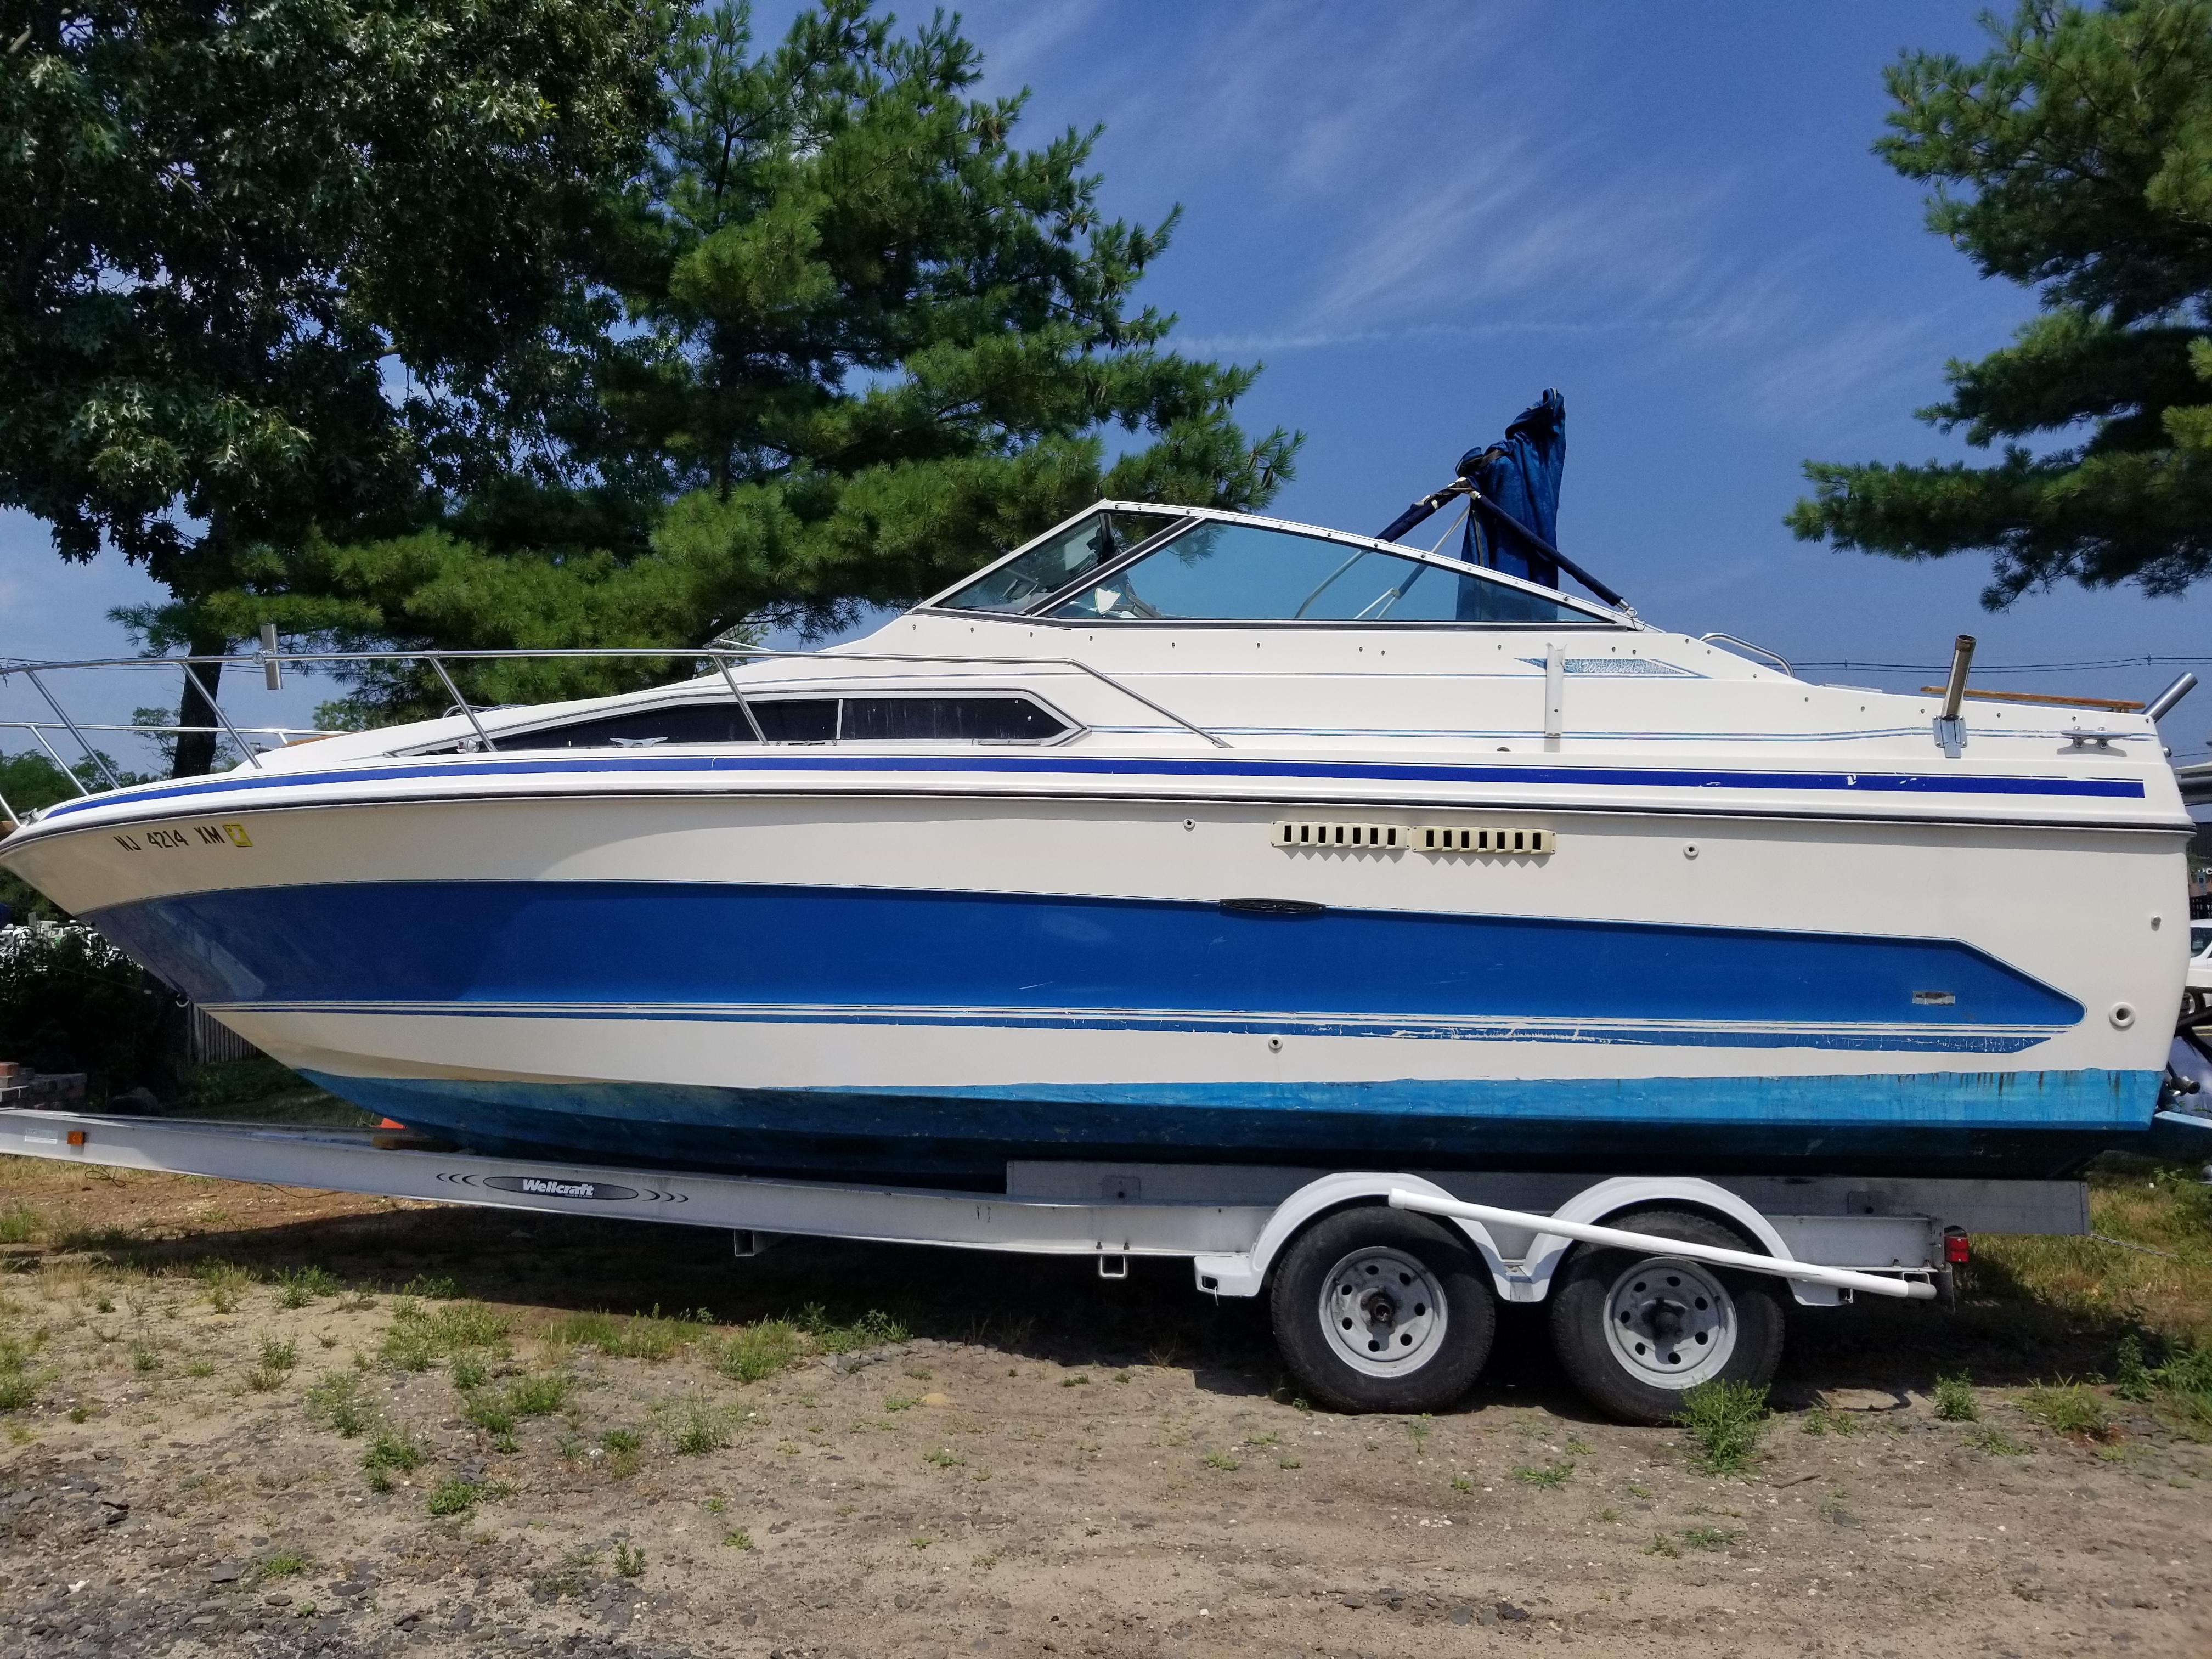 LIVE ONSITE BOATS TO BE AUCTIONED OFF!  SALE POSTPONED!  NEW DATE: SATURDAY JULY 11TH @ 3:30PM!